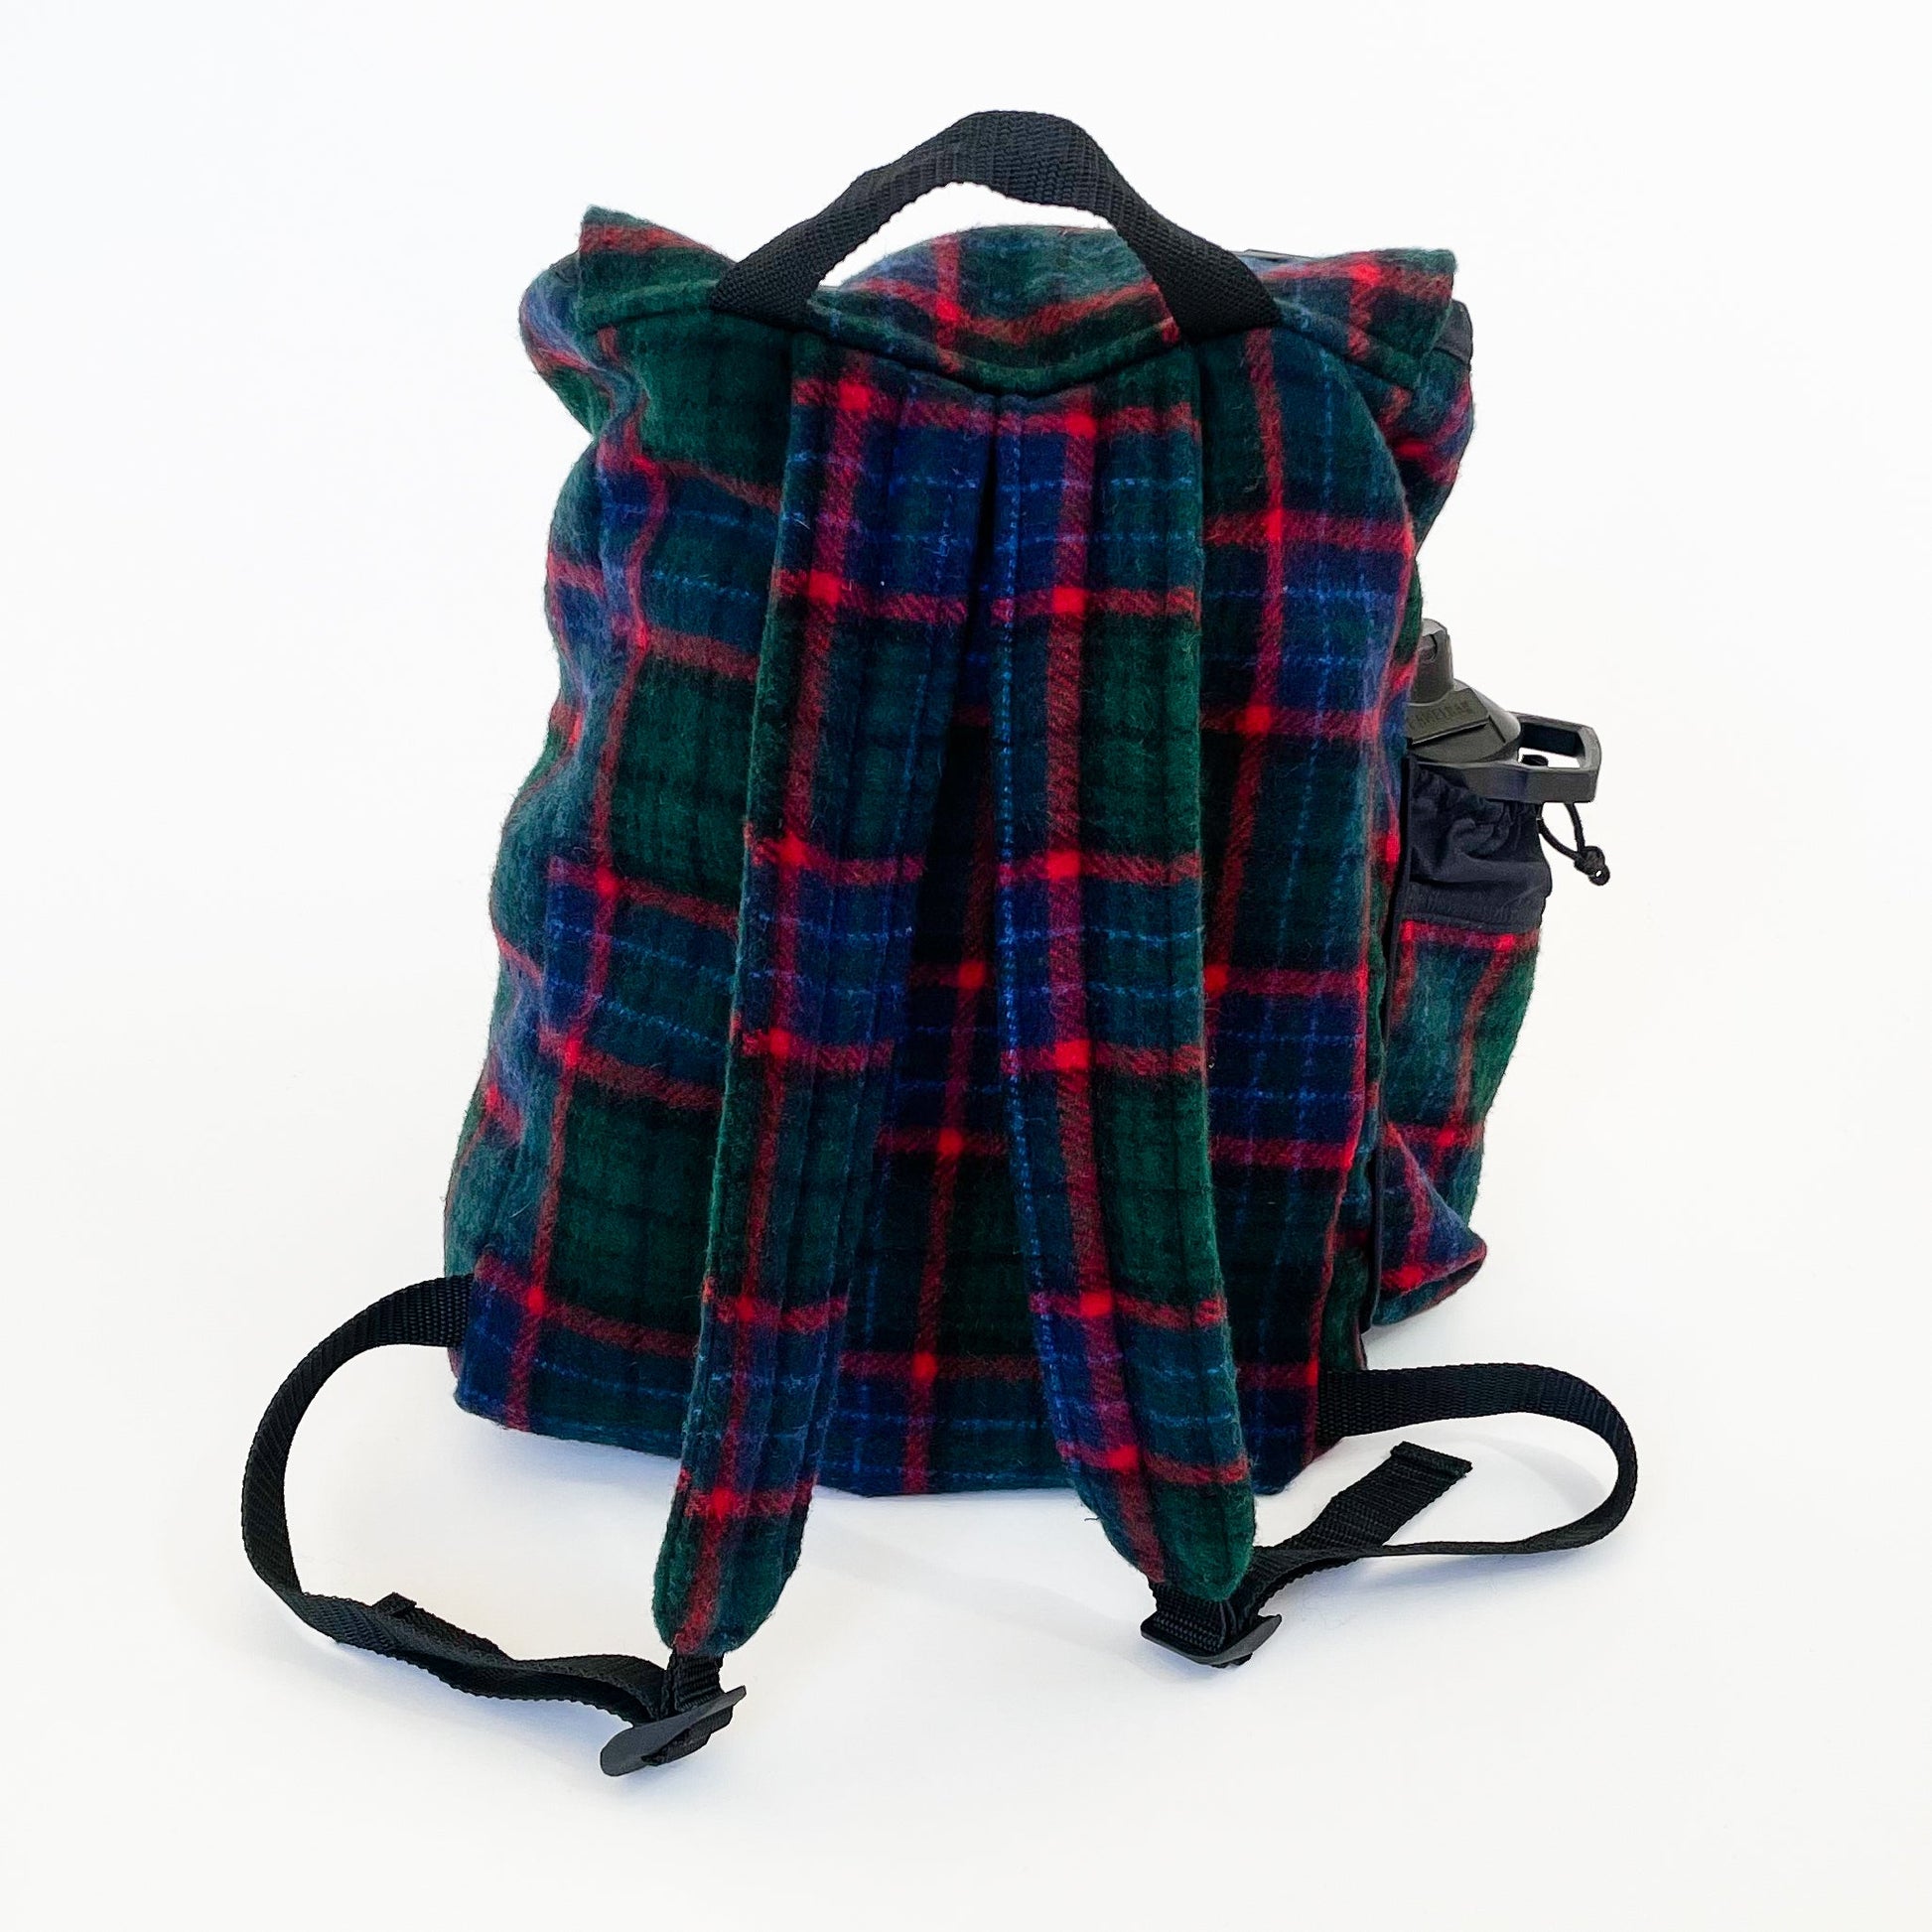 Wool back pack green and blue with red windowpane print, shown with water bottle in side pocket, back view